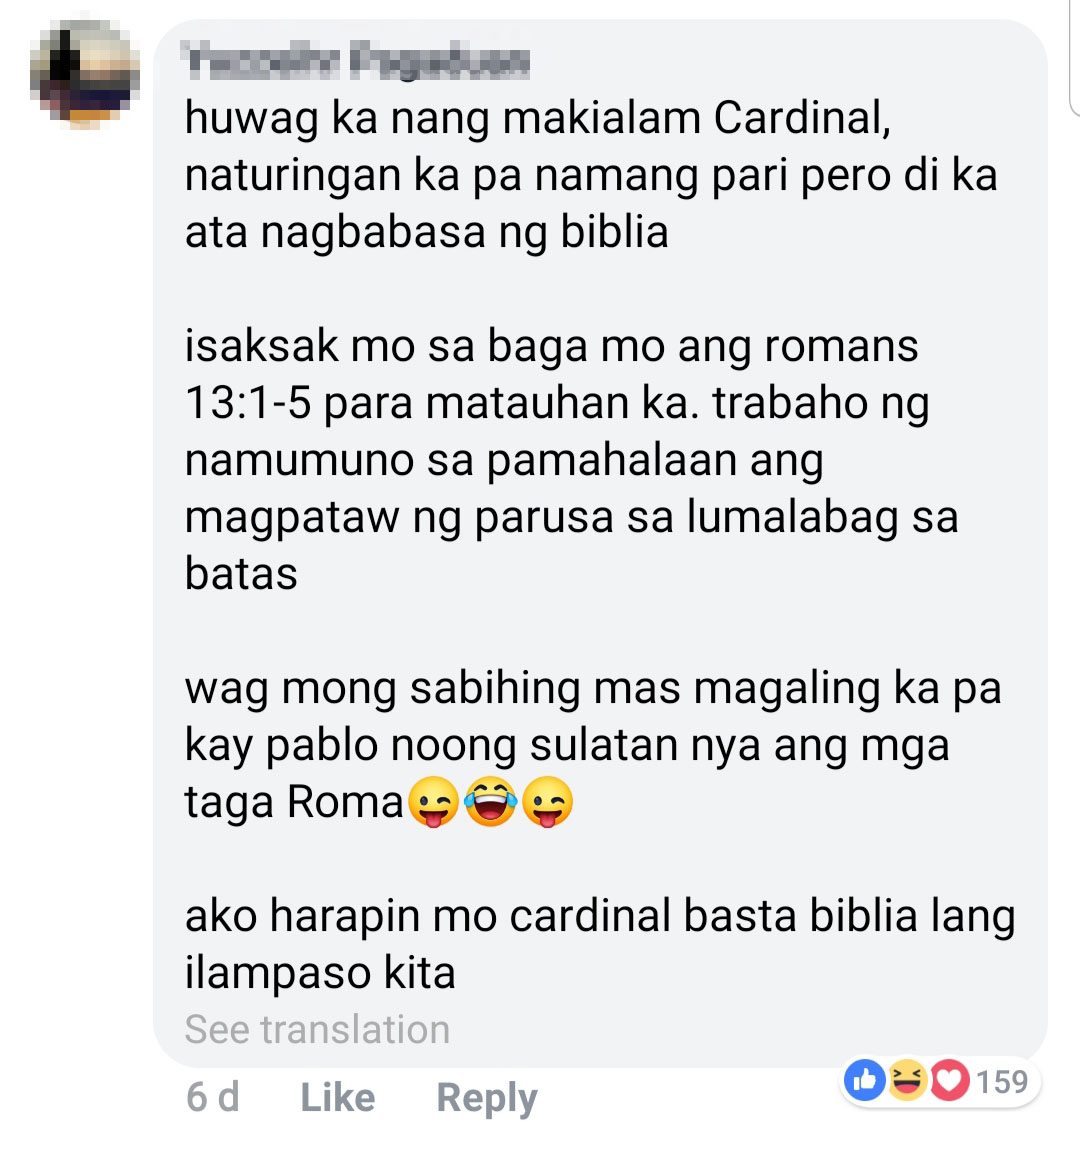 SCORNFUL COMMENTS. The post generated comments against the Archbishop 